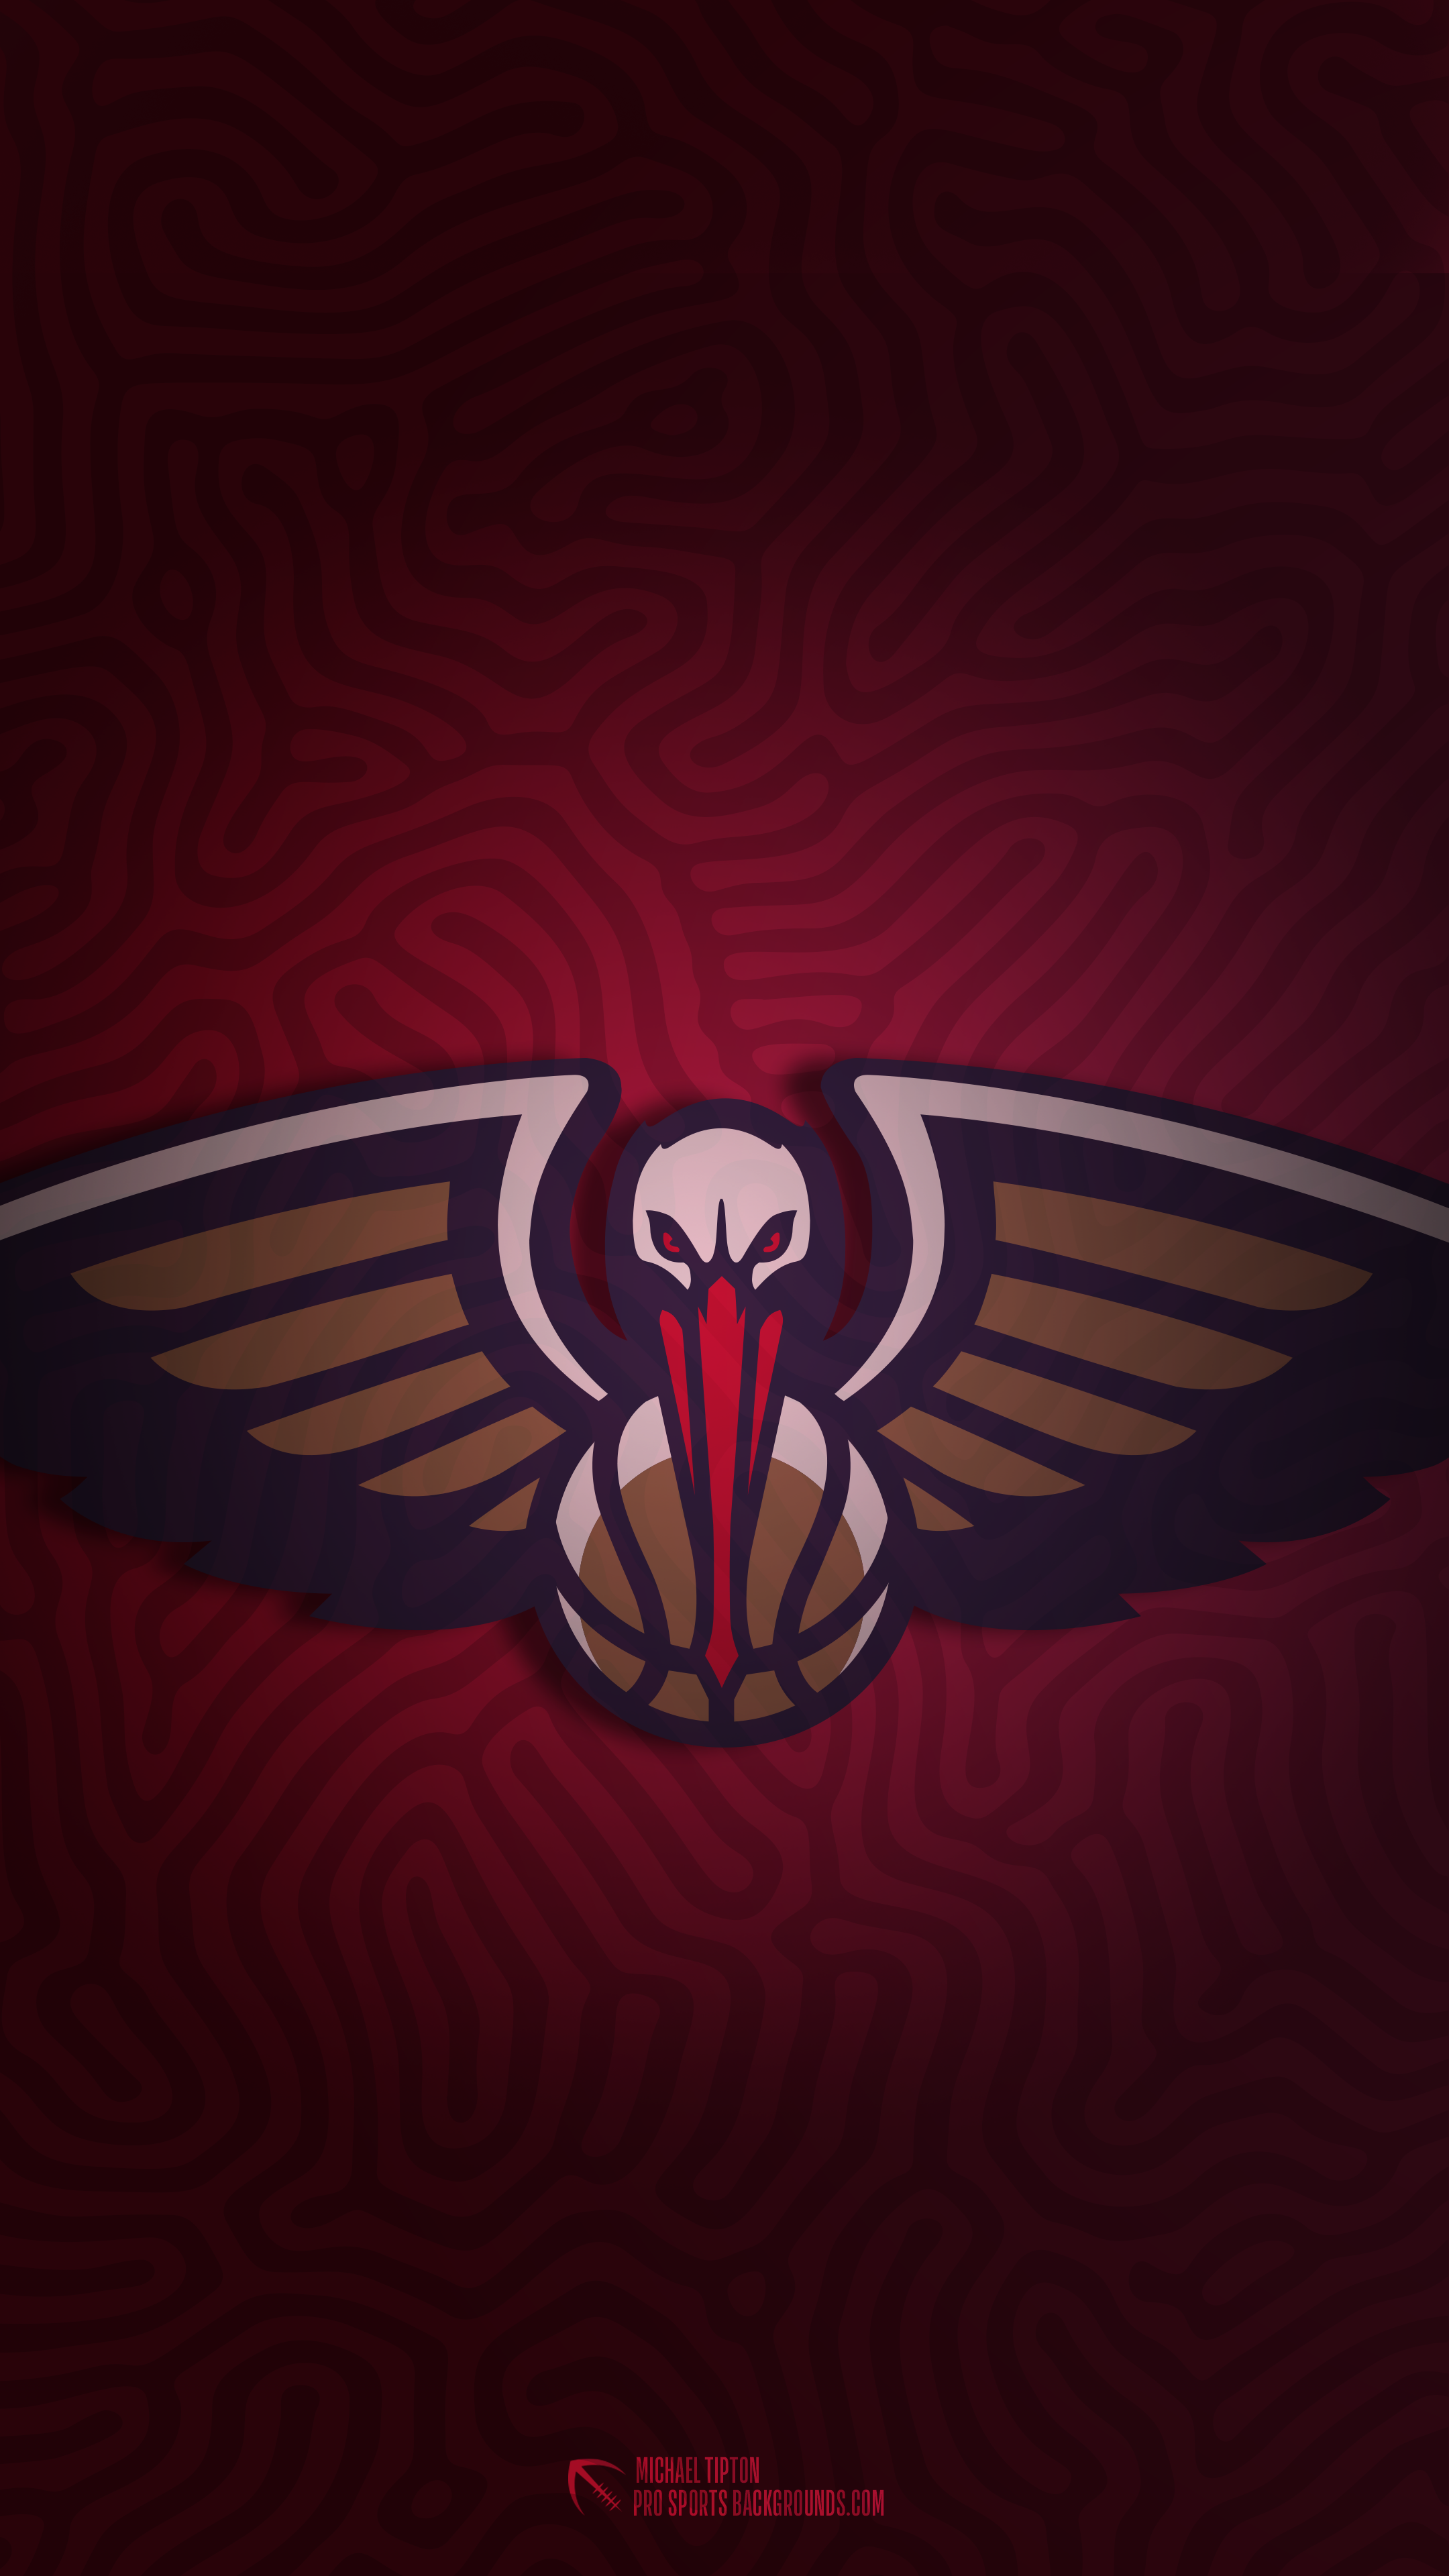 New Orleans Pelicans Wallpaper Pro Sports Background